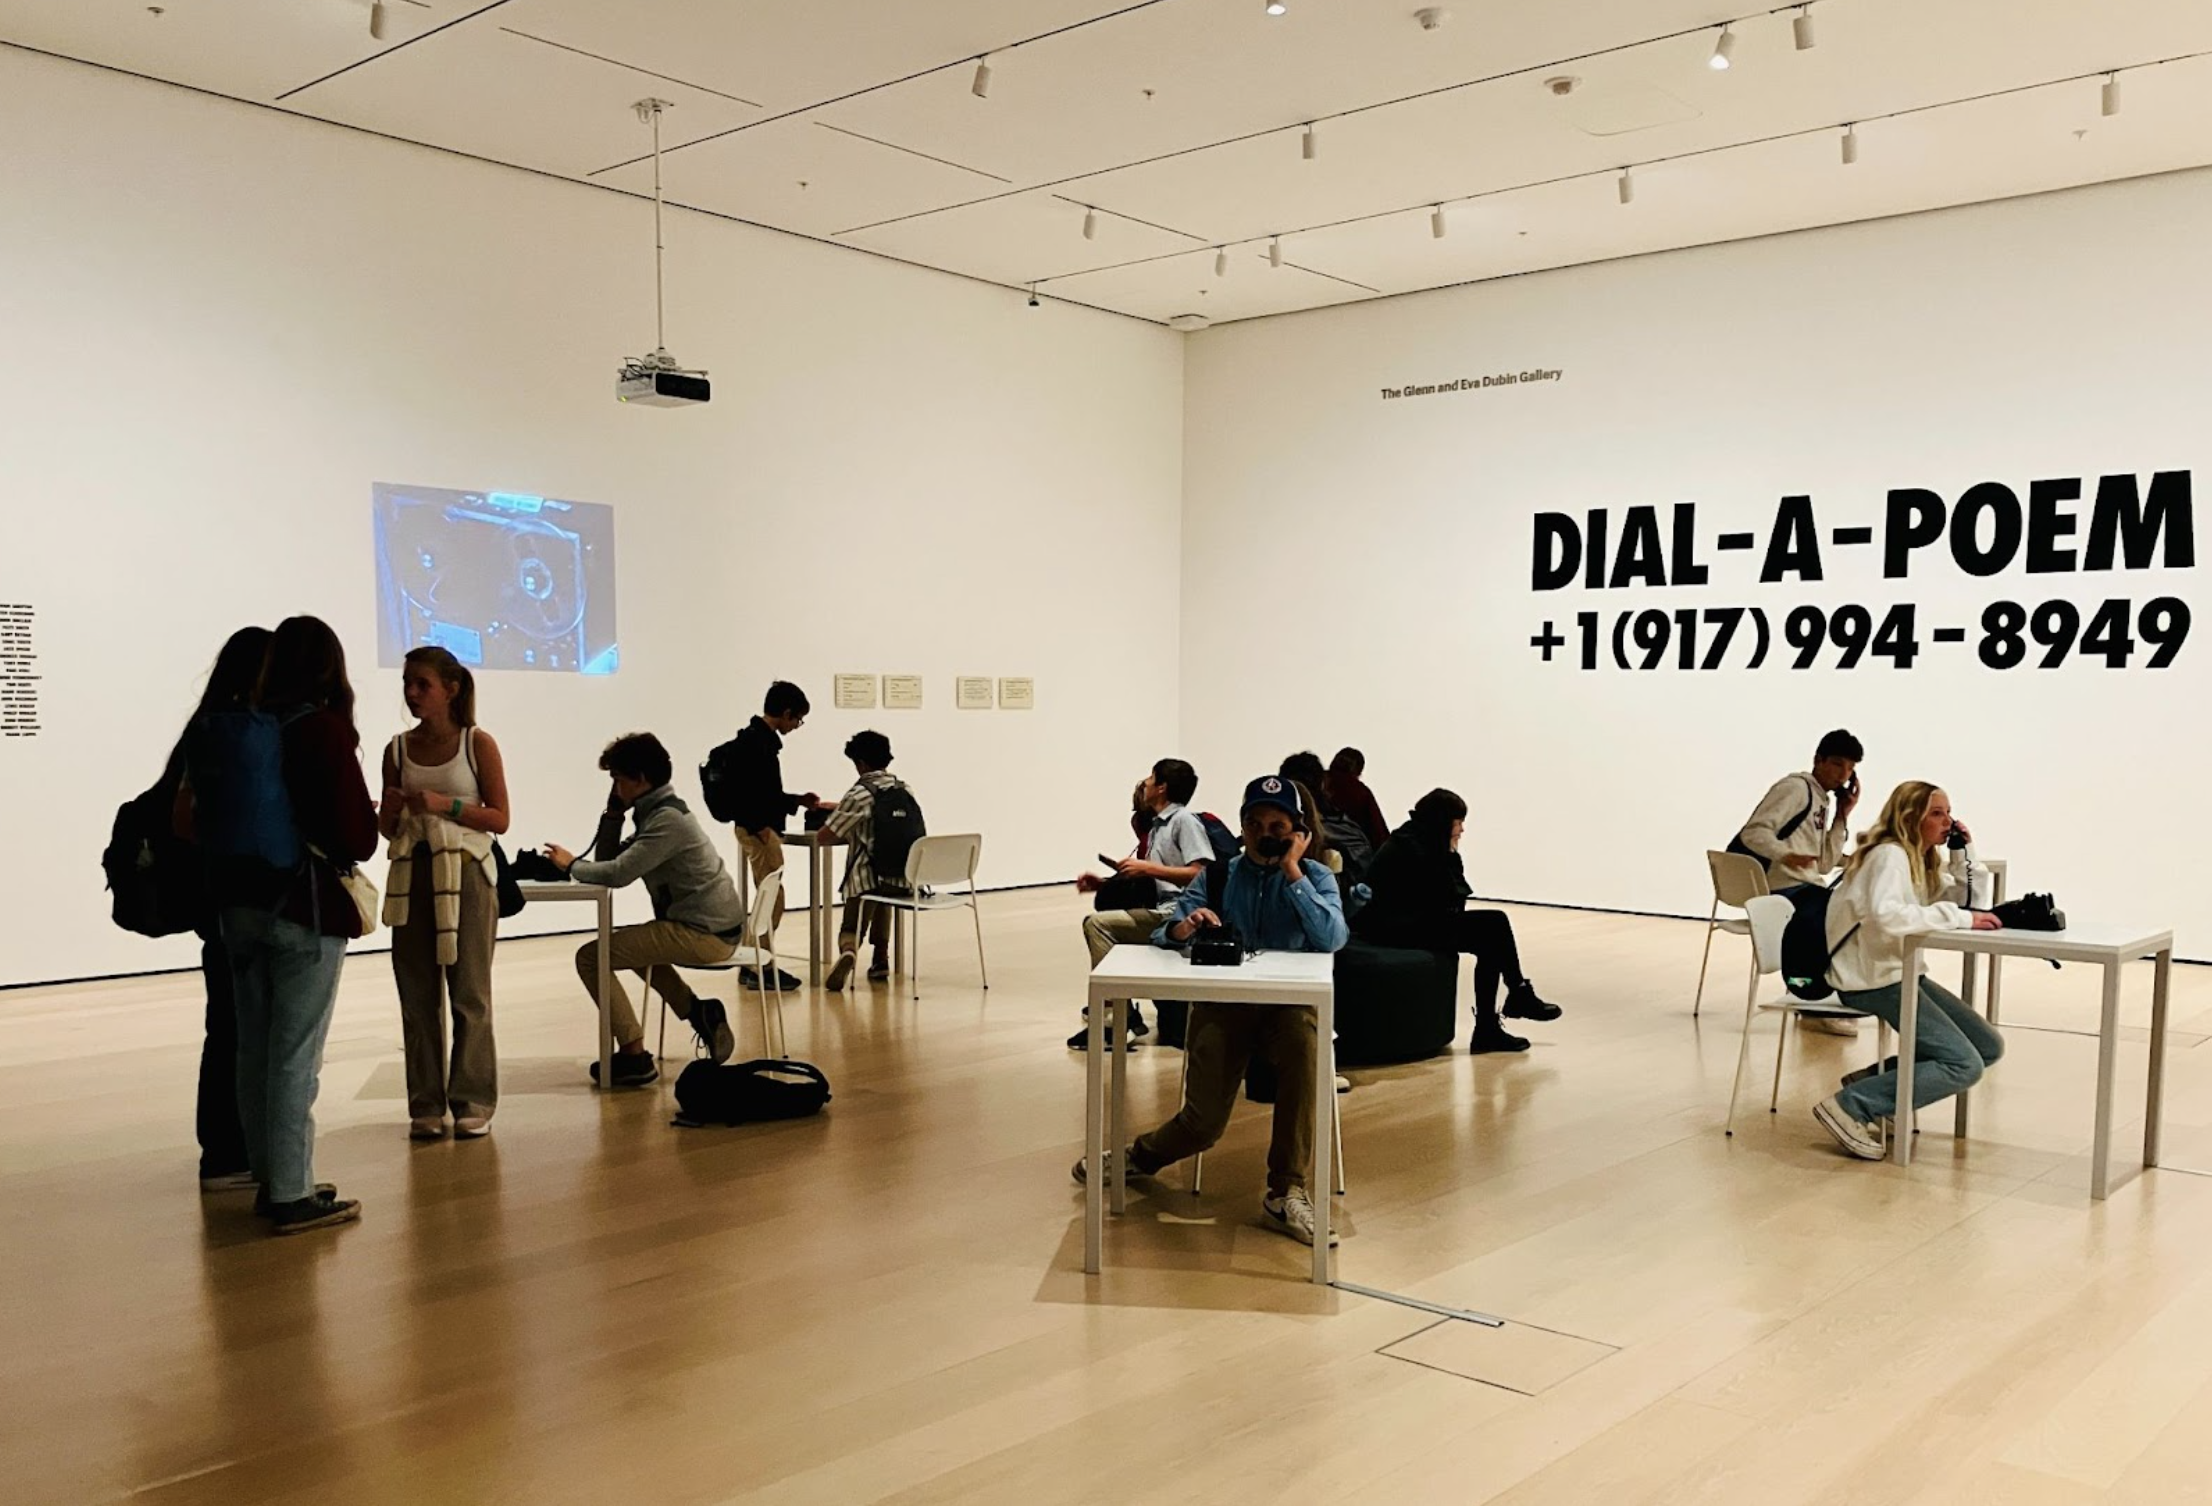 Students Dial-A-Poem at MoMA by Margaret Monteith